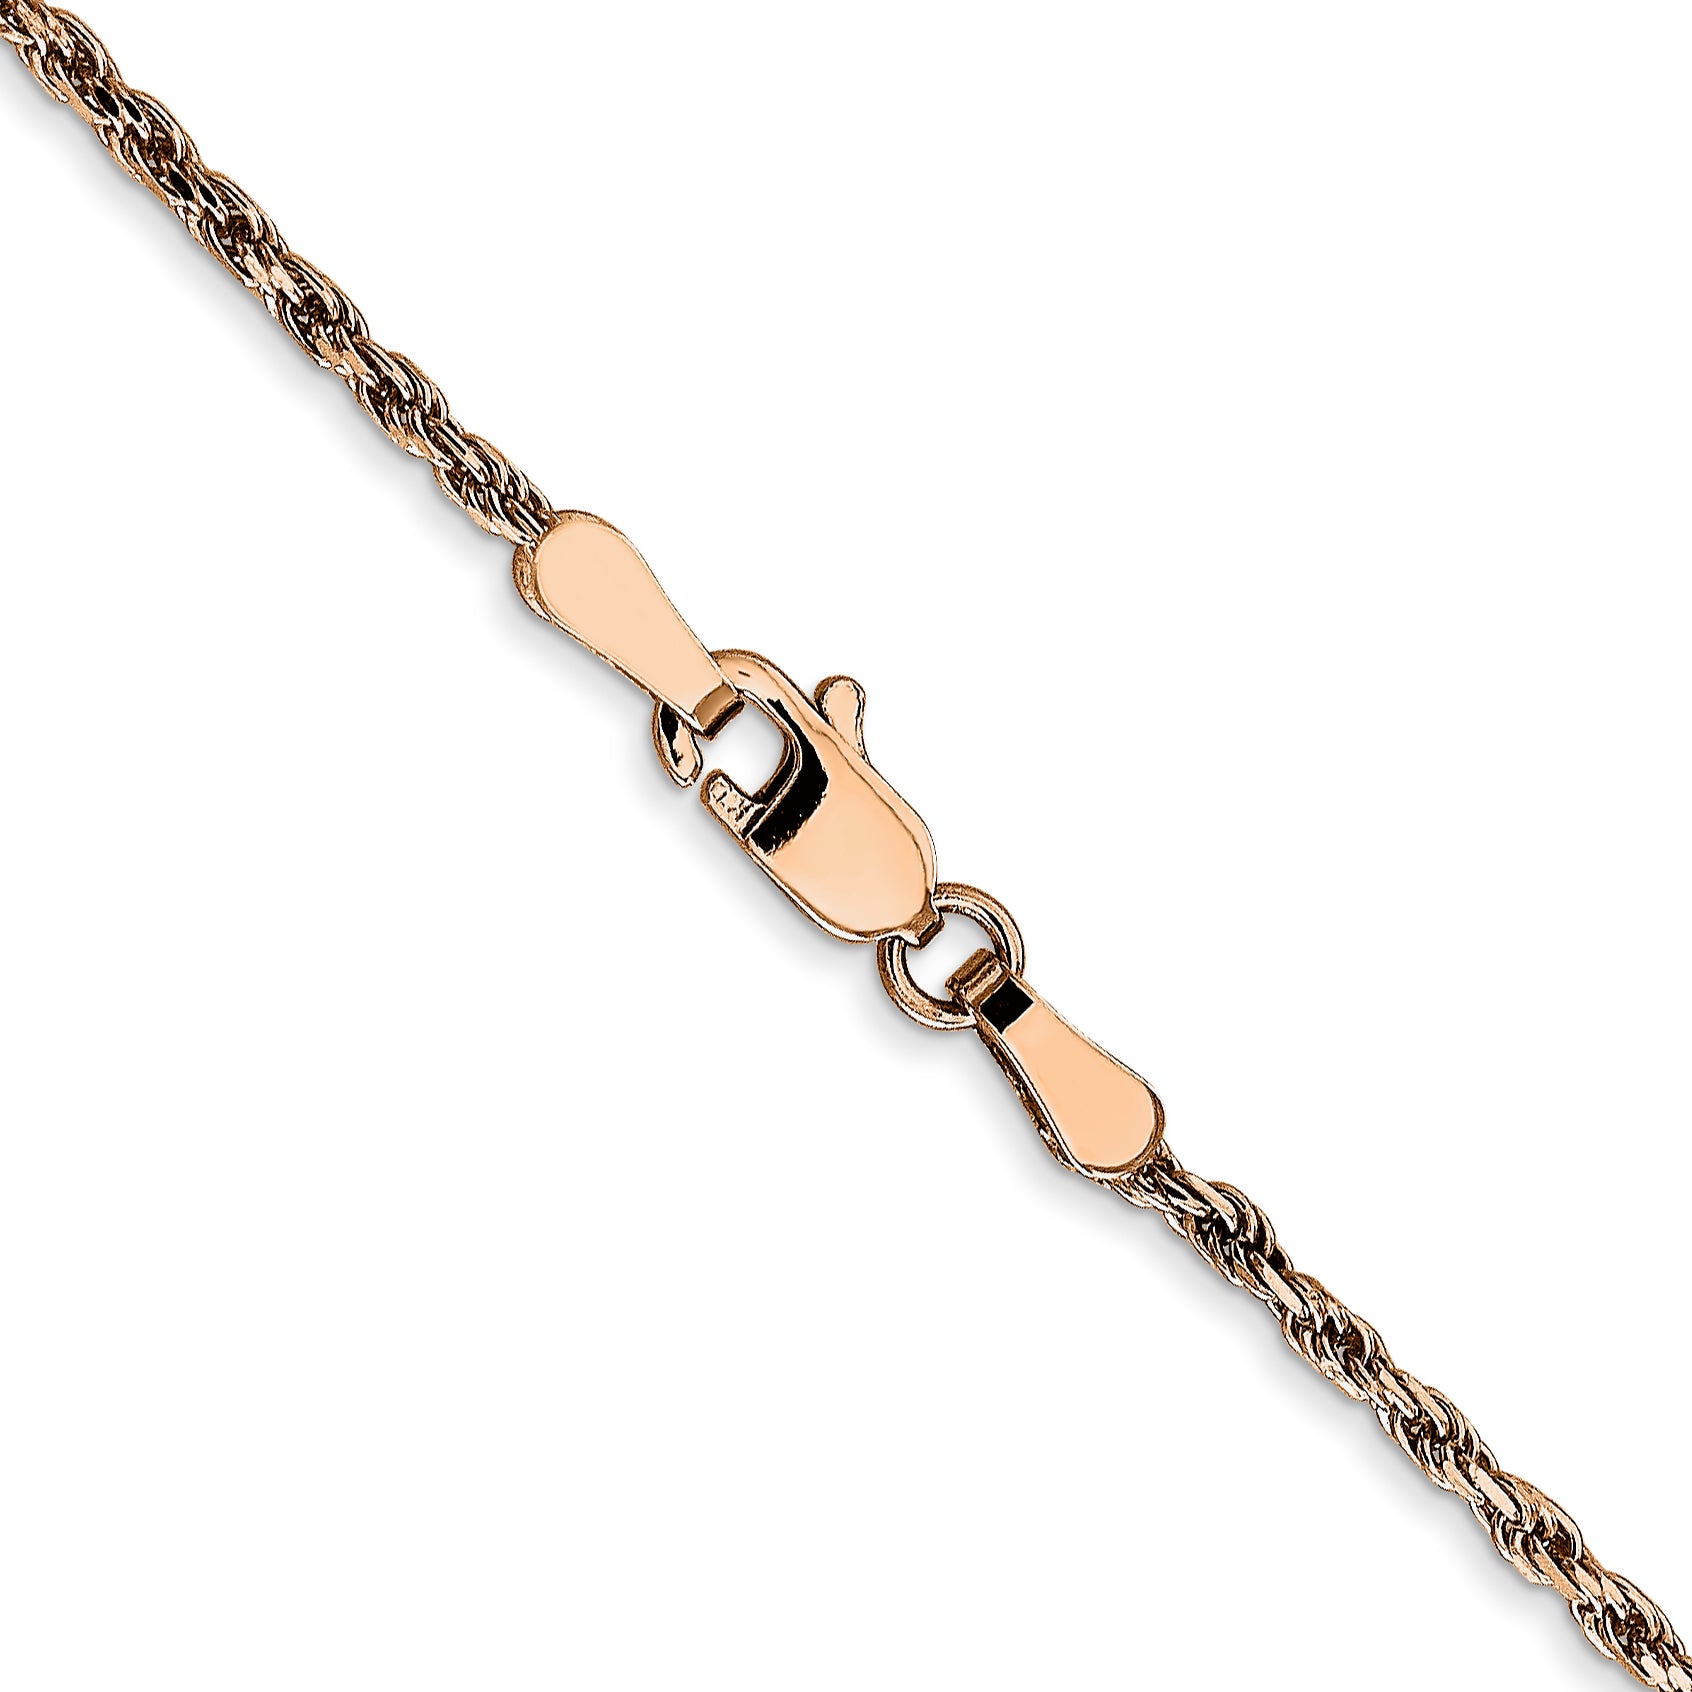 14K Rose Gold 16 inch 1.8mm Diamond-cut Man Made Rope with Lobster Clasp Chain